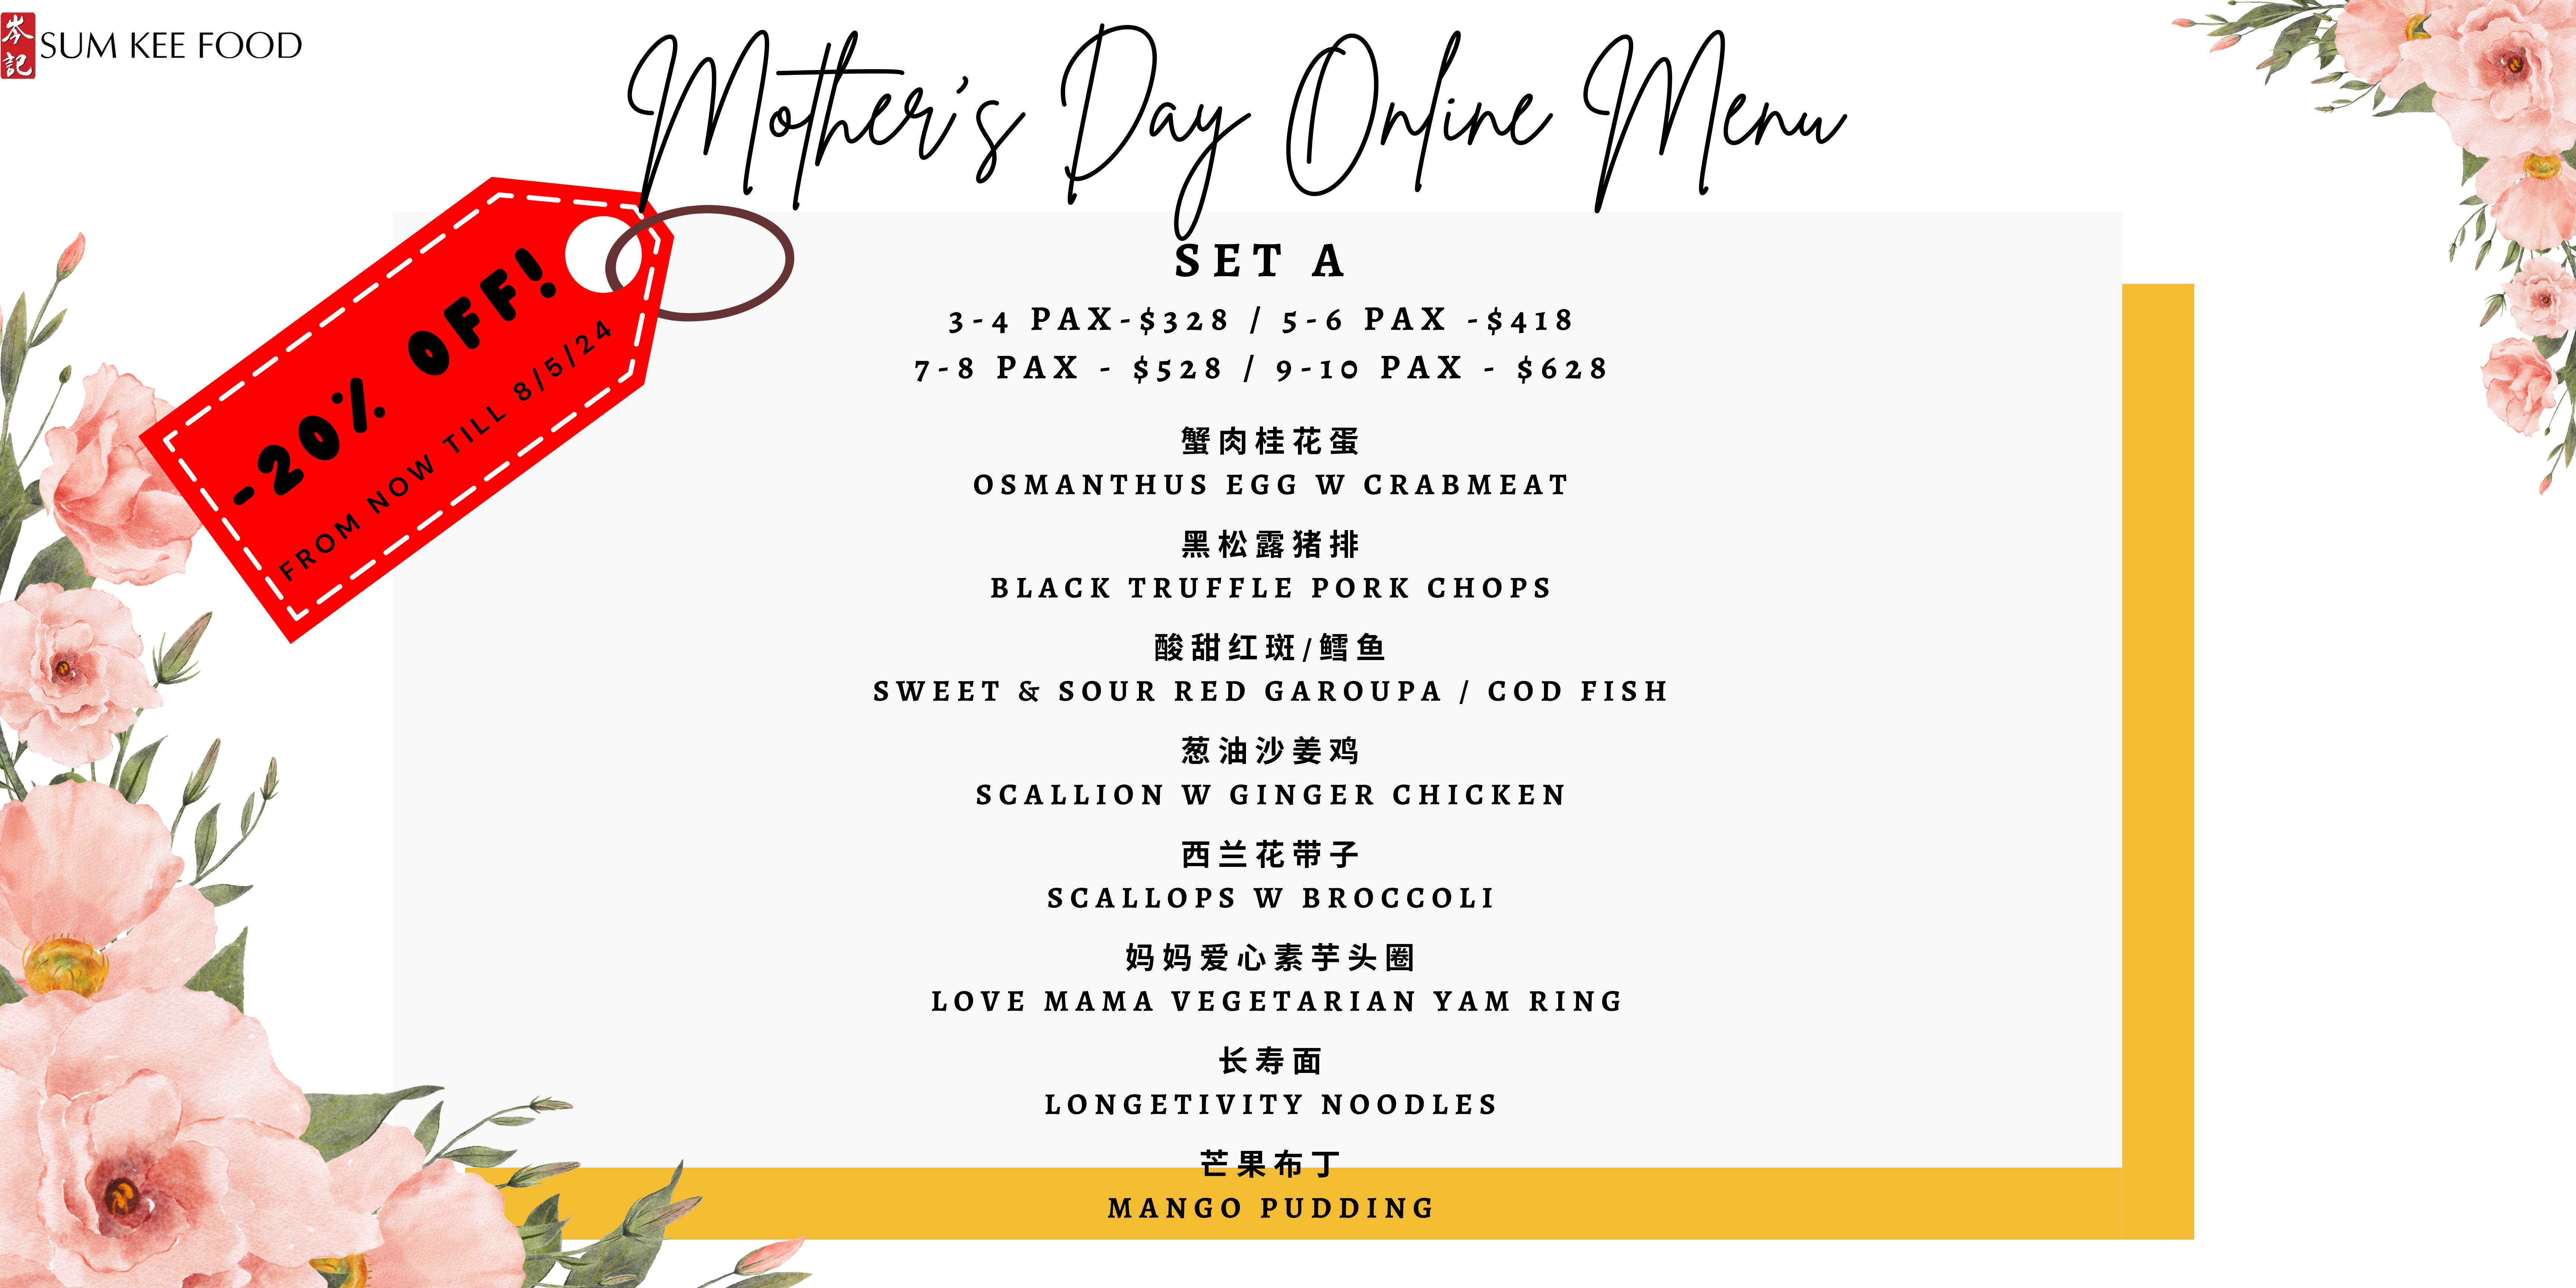 20% DISCOUNT ON MOTHER'S DAY MENU